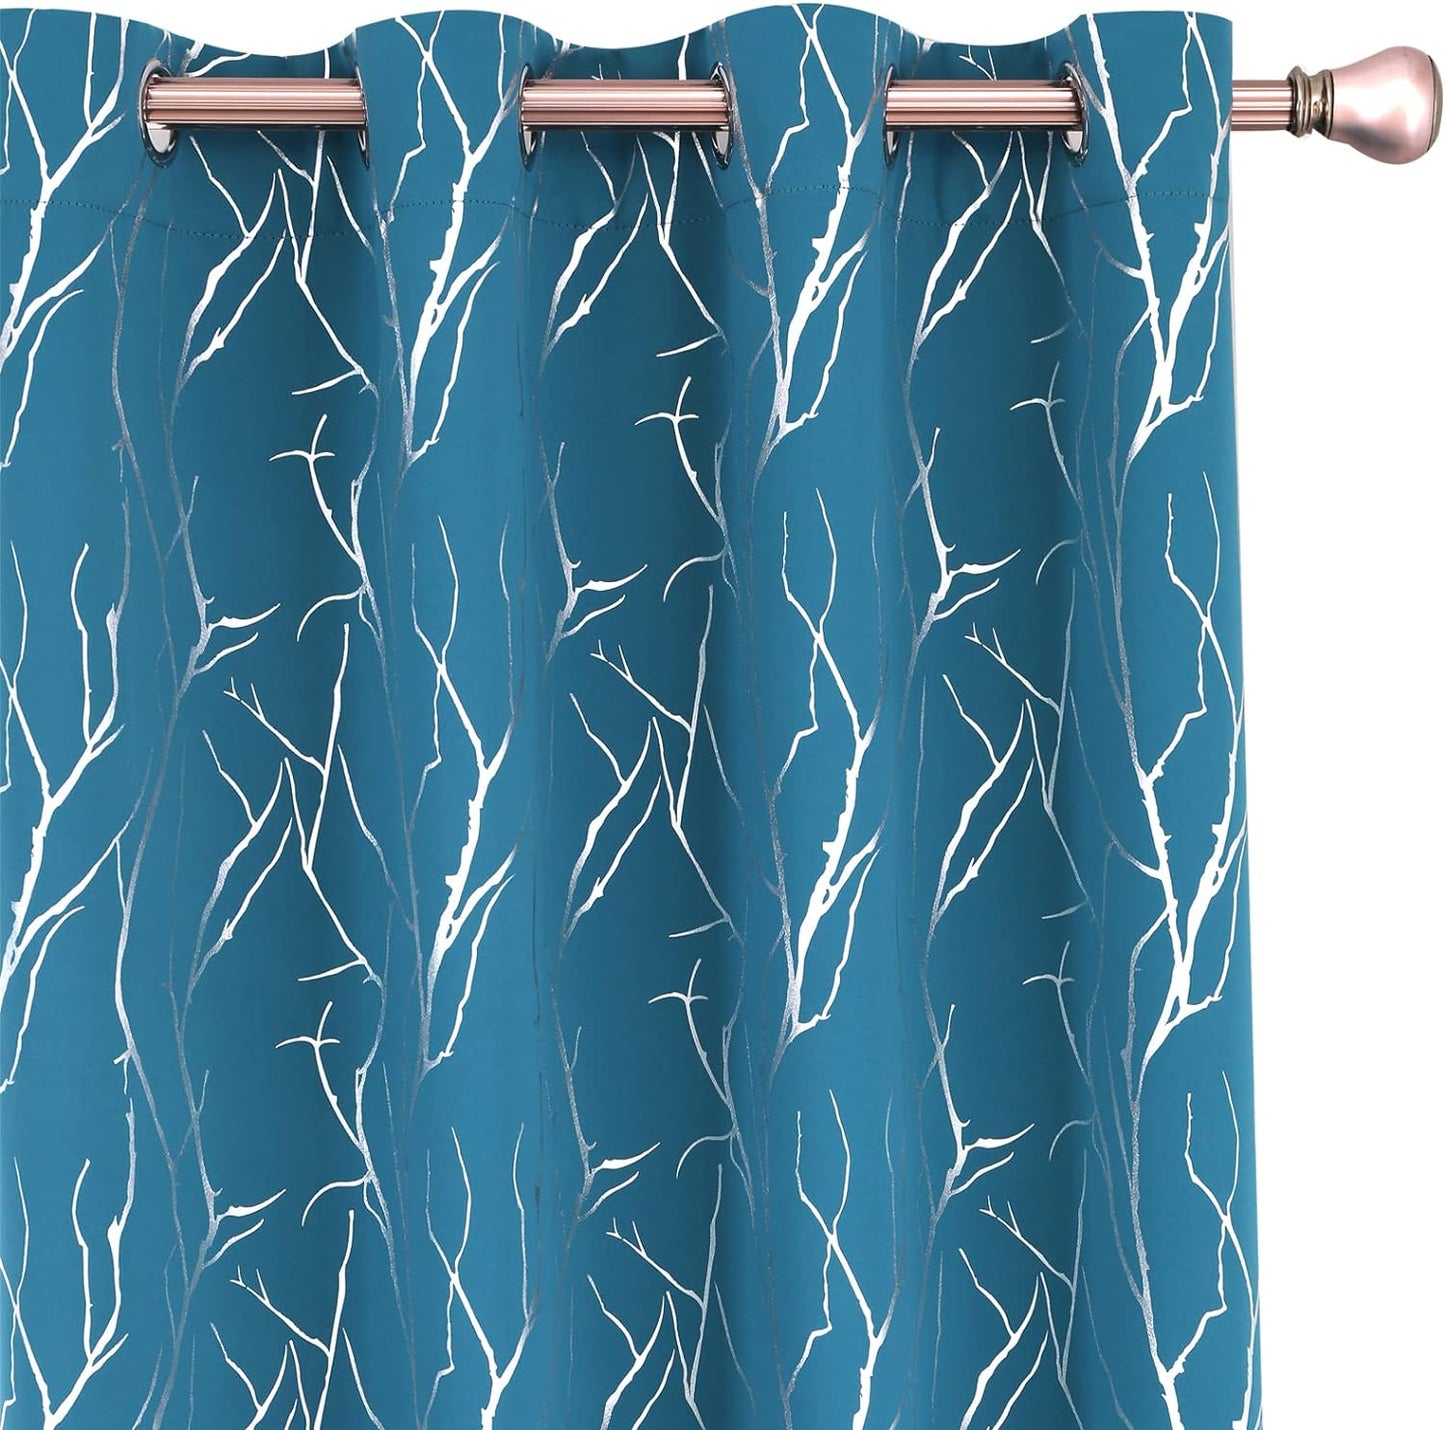 SMILE WEAVER Black Blackout Curtains for Bedroom 72 Inch Long 2 Panels,Room Darkening Curtain with Gold Print Design Noise Reducing Thermal Insulated Window Treatment Drapes for Living Room  SMILE WEAVER Tree Branch-Peacock Blue 52Wx63L 